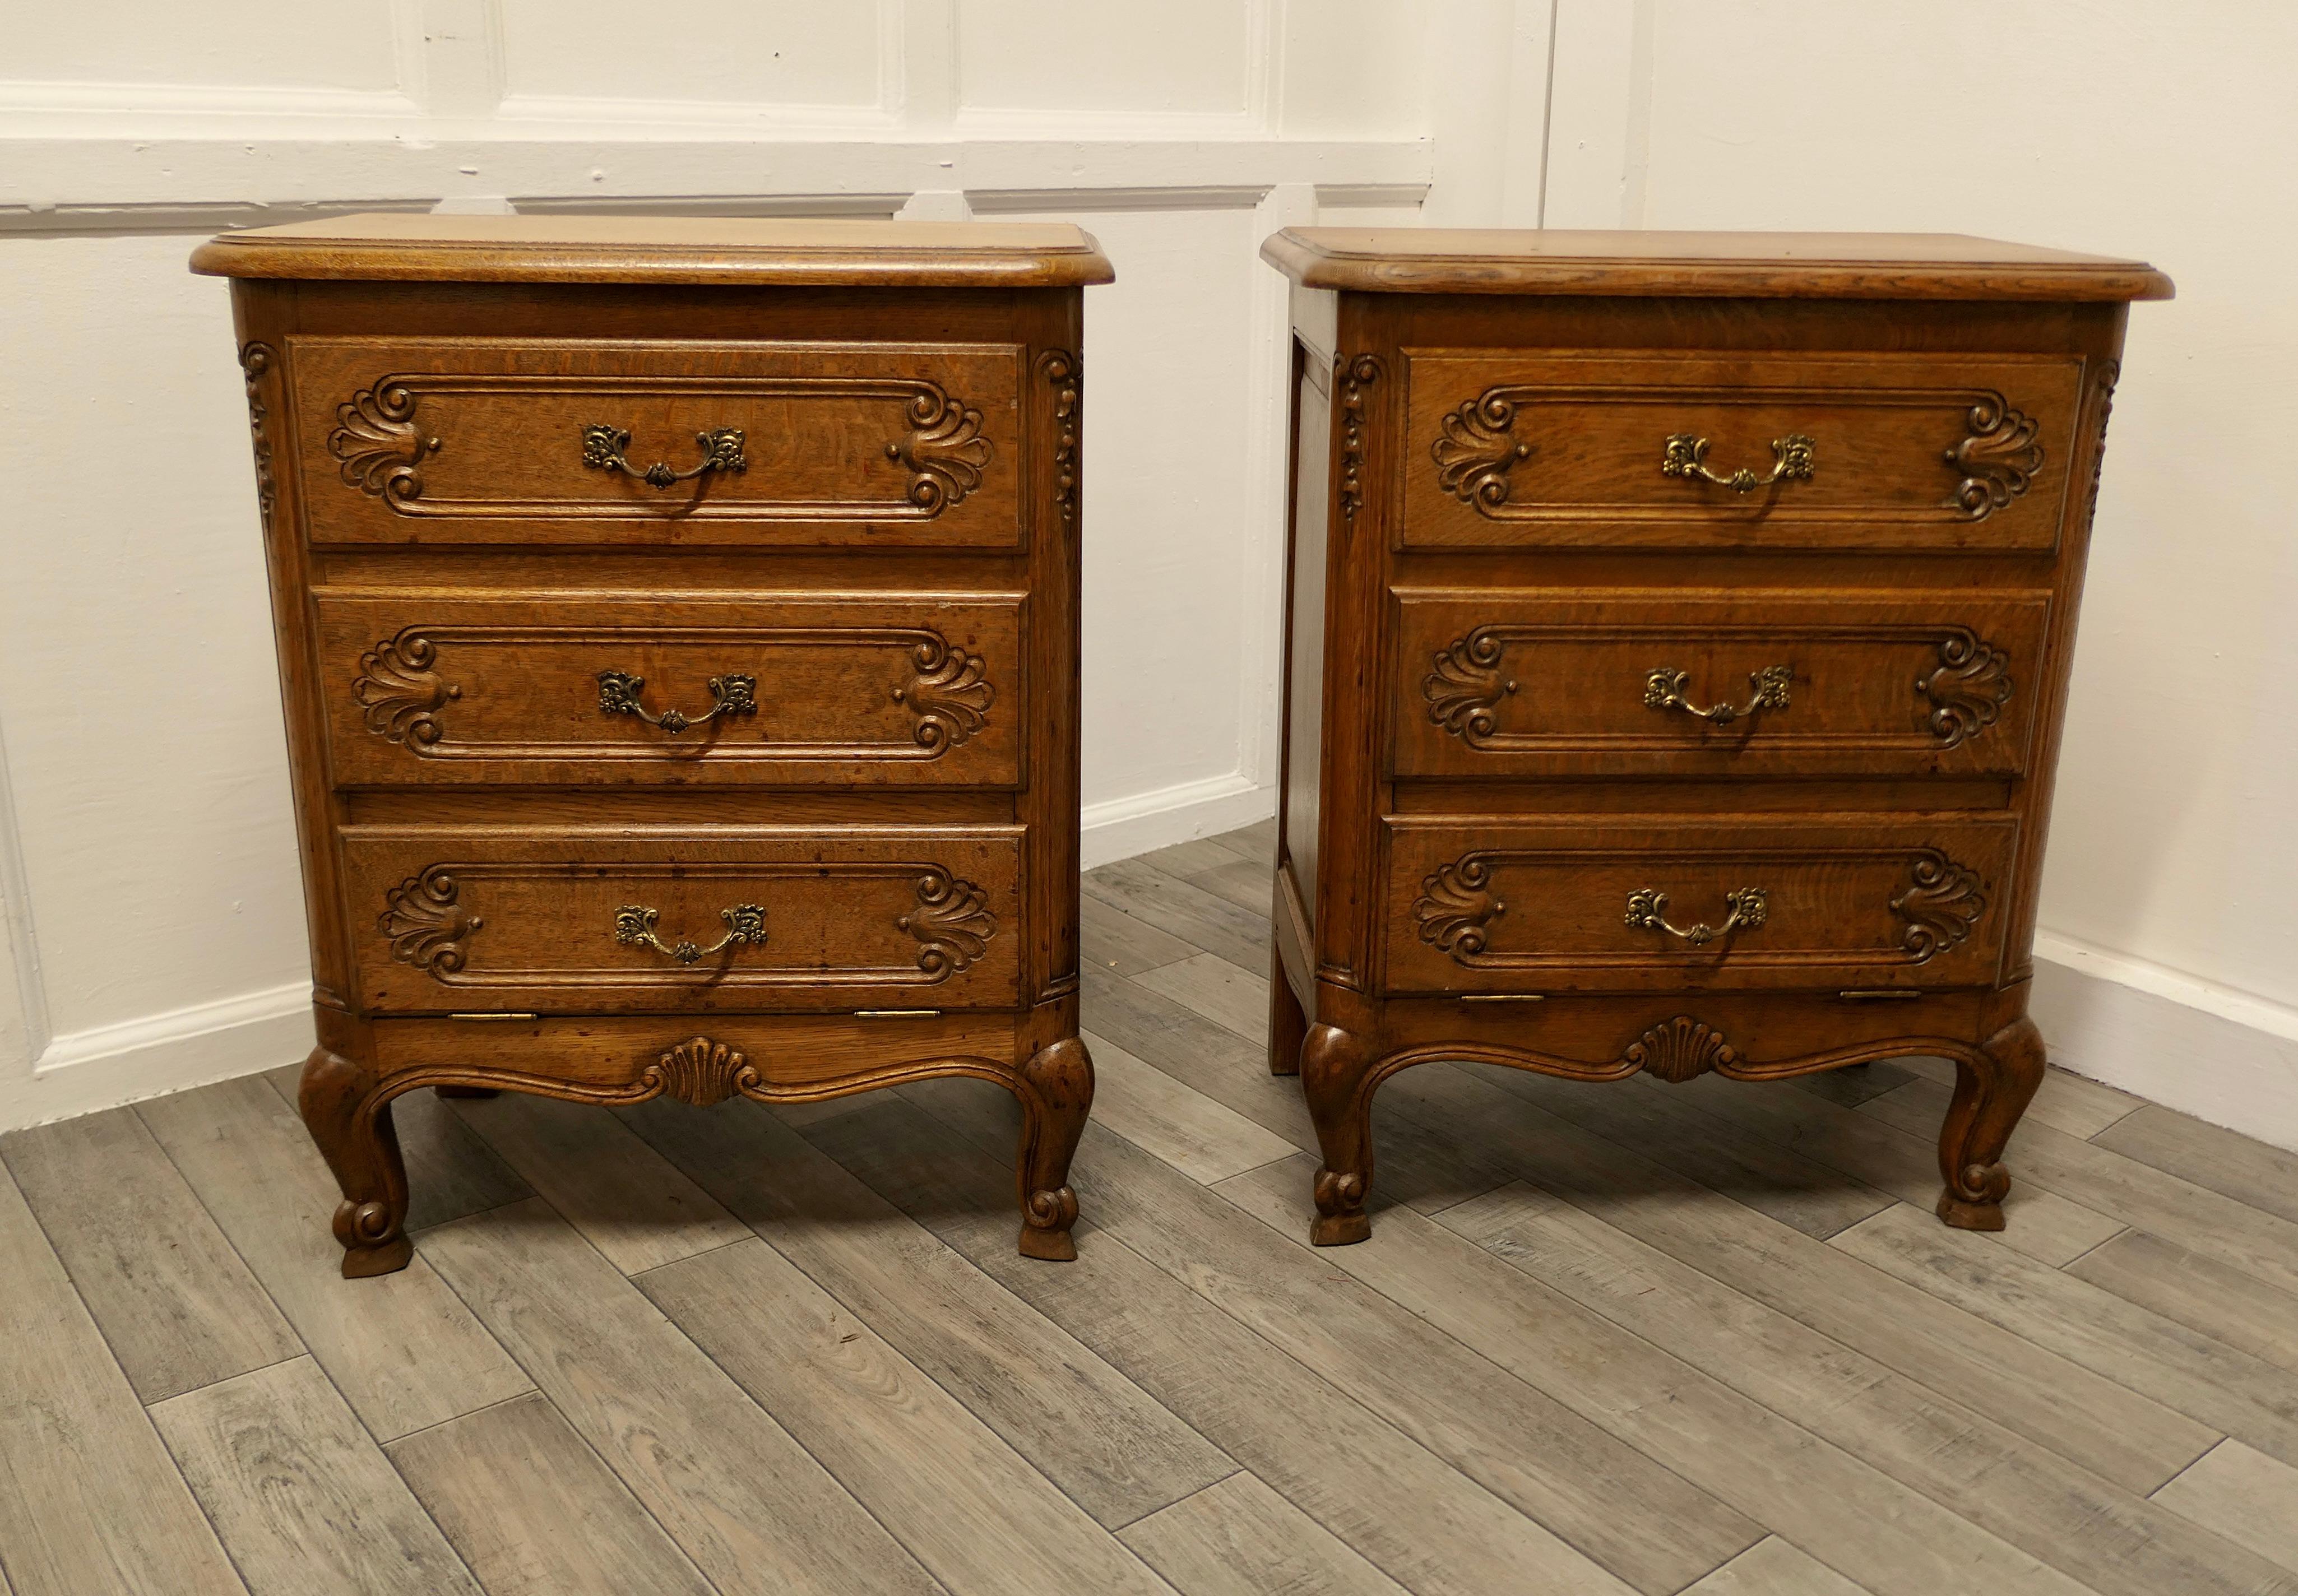 A Pair of Small French Golden Oak Chests of Drawers

These are wonderful little chests, they appear to have 3 drawers to the front, the bottom 2 drawer fronts have a combined fall front they all have brass ormolu handles and are carved in the French